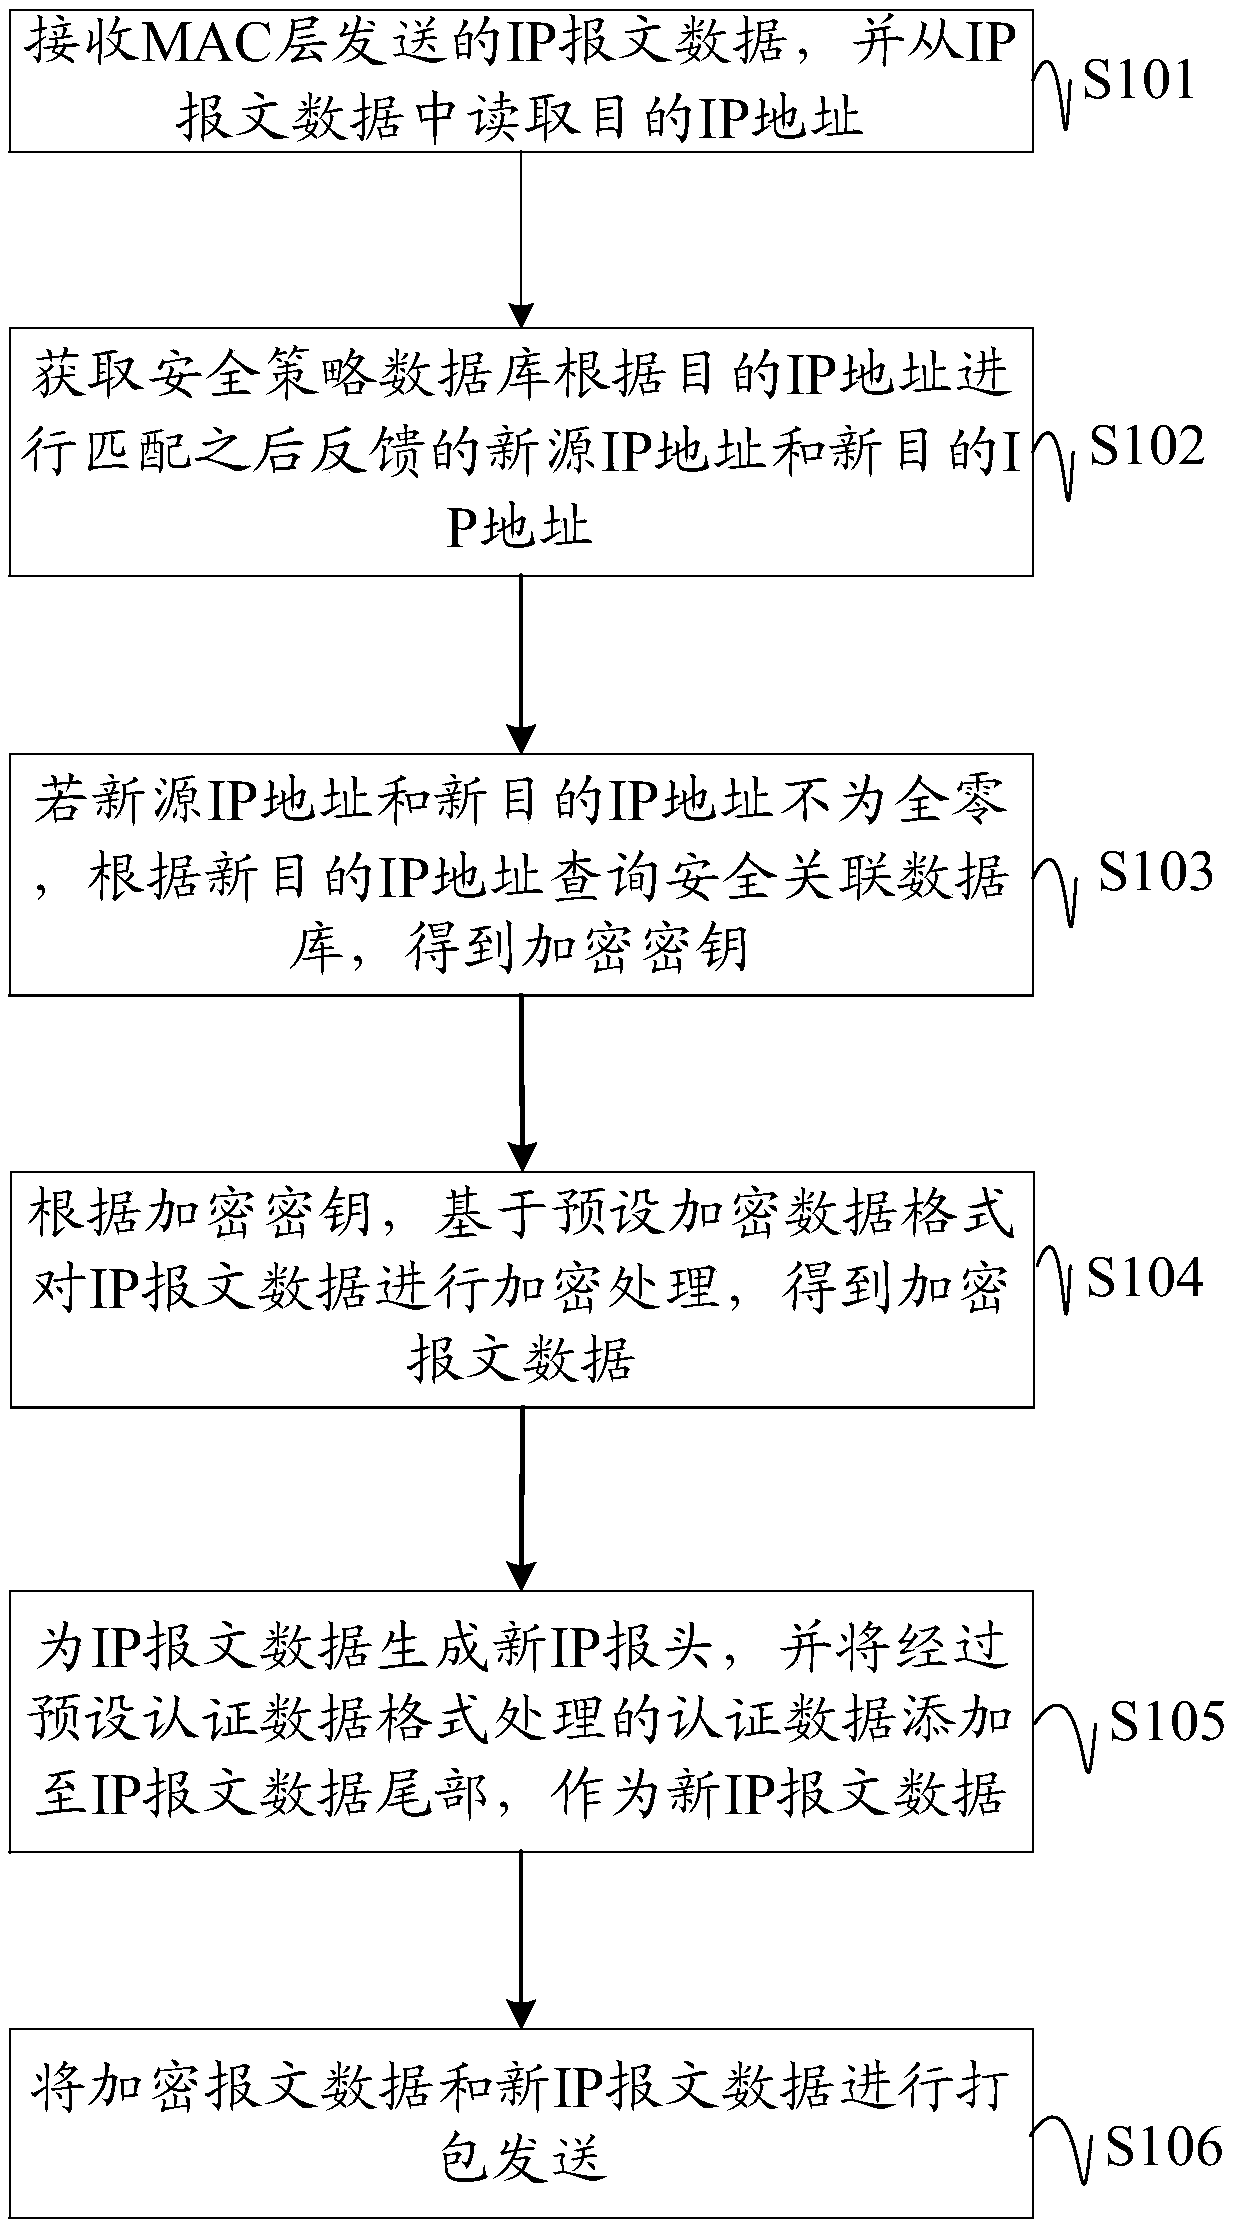 Internet Protocol security internet (IPsec) message format processing method, device and equipment, and storage medium